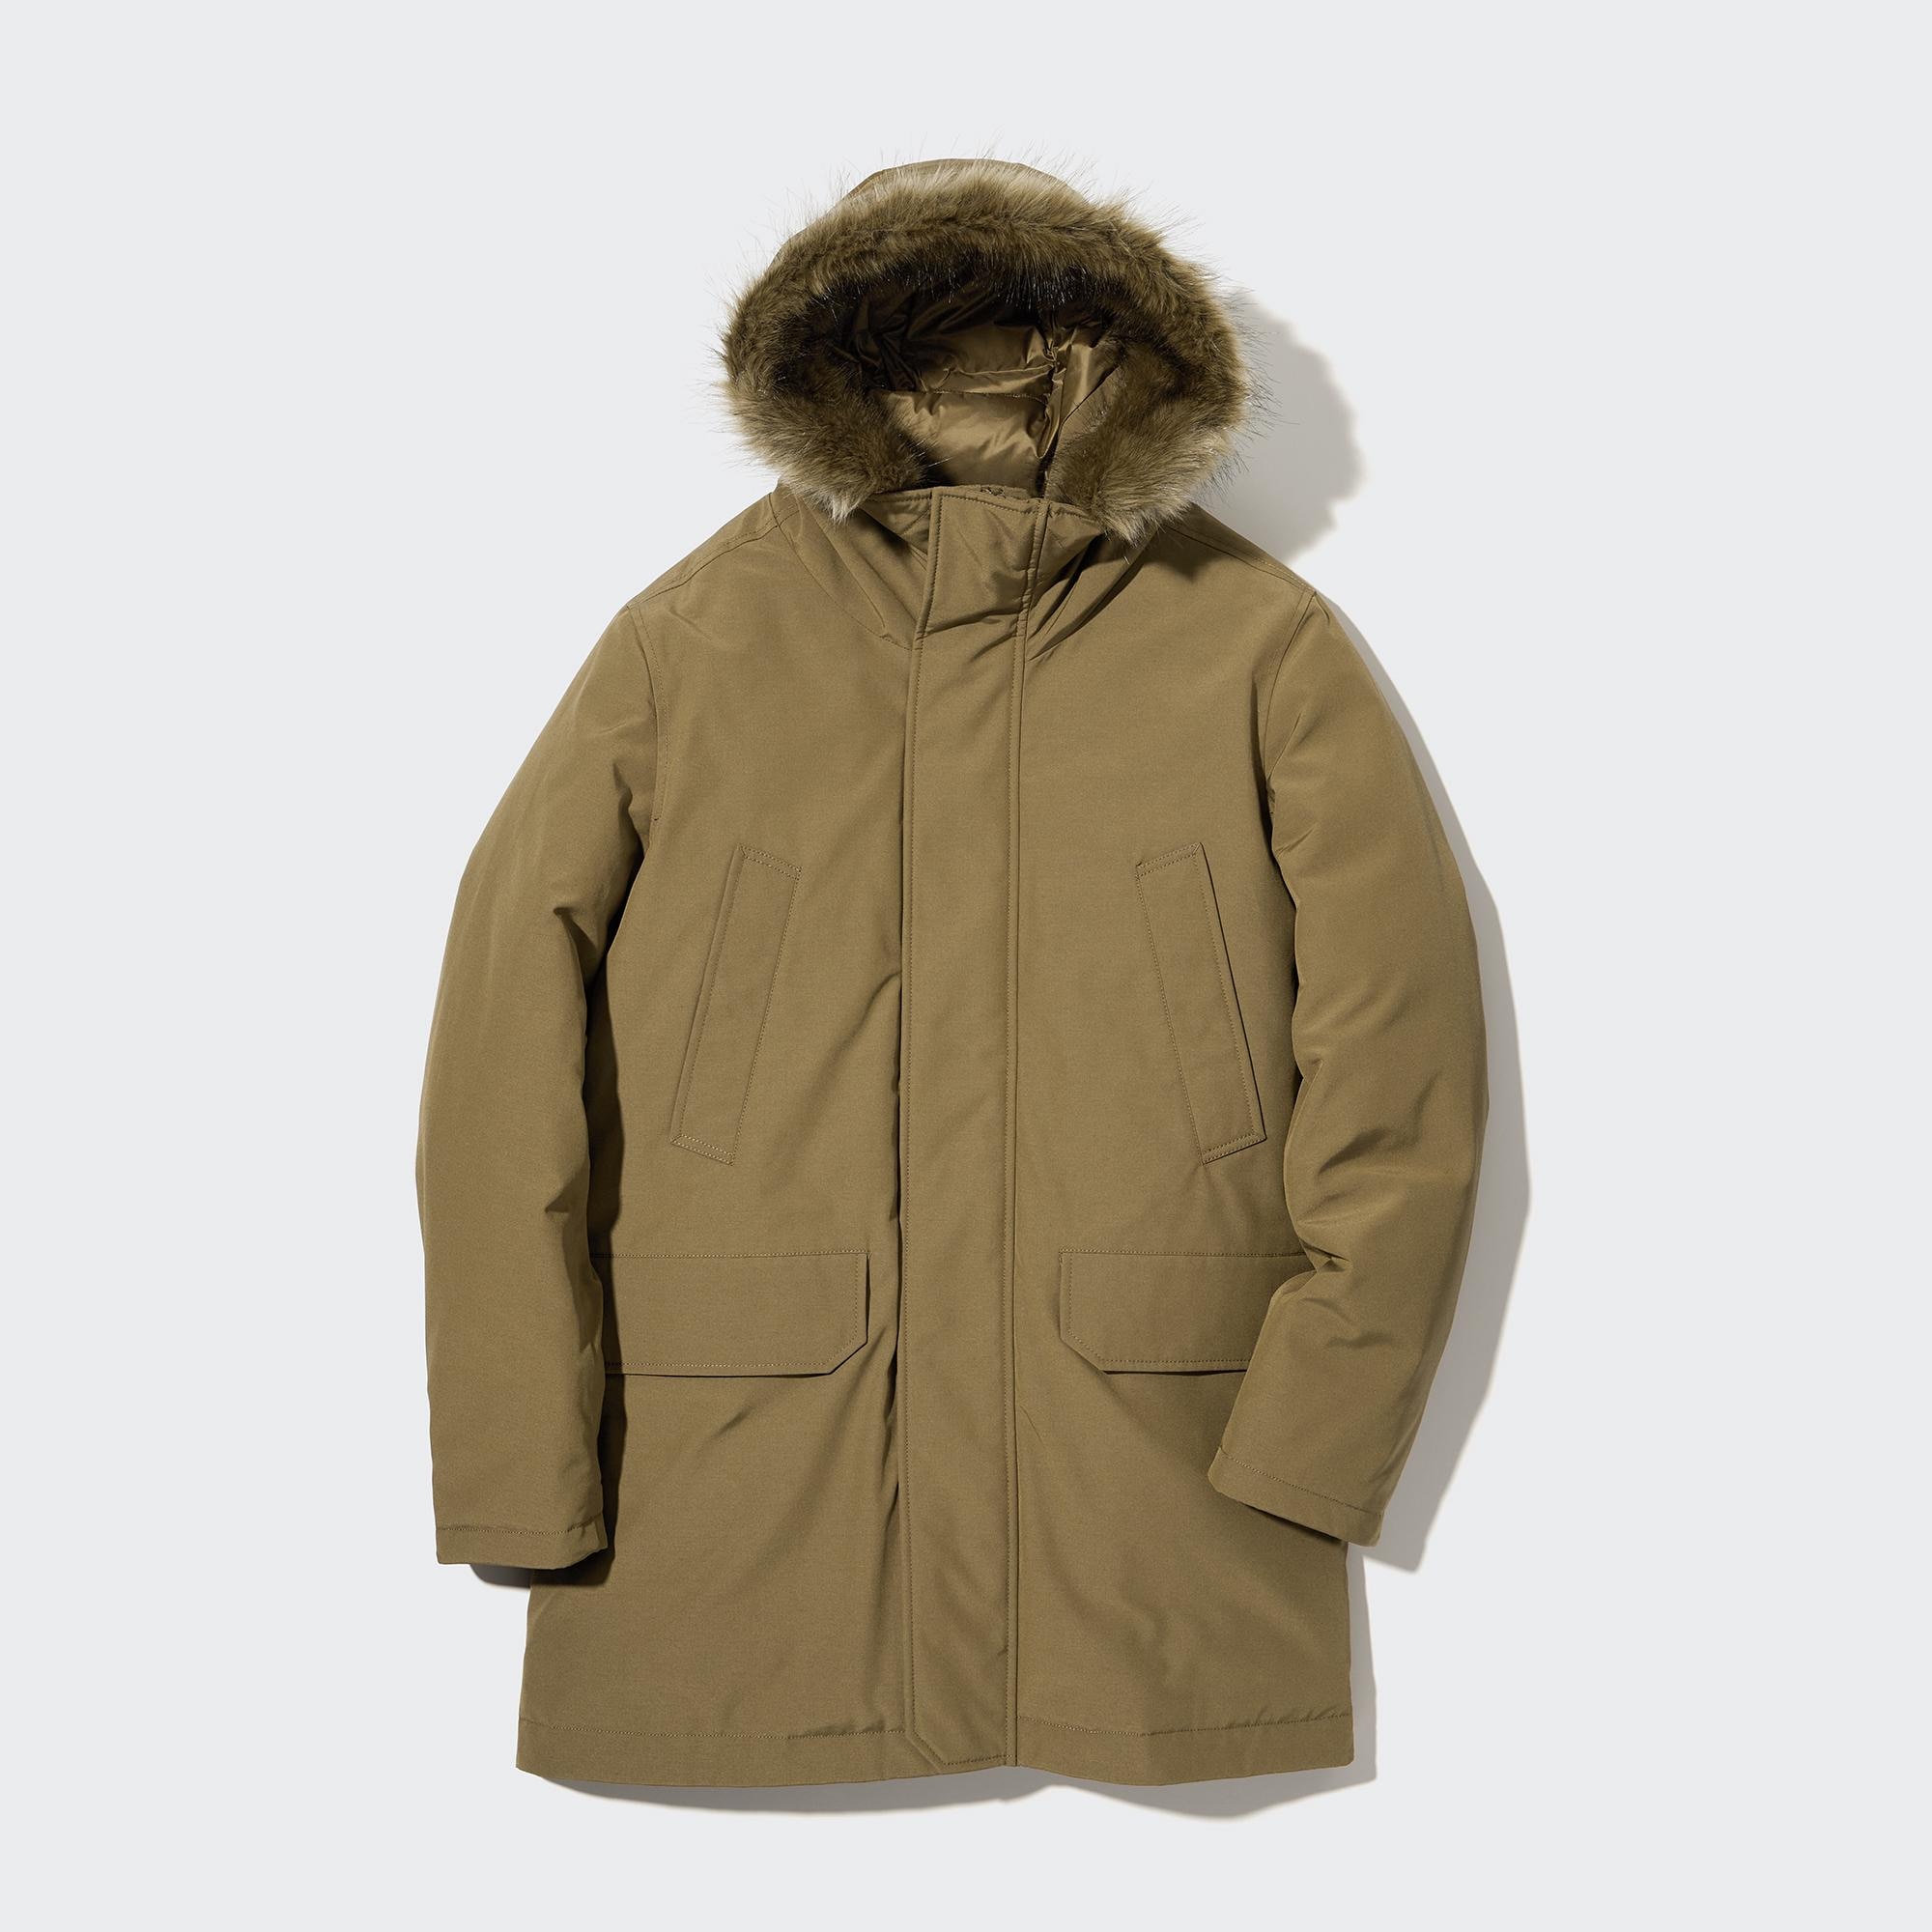 Uniqlo Hybrid Down Your ultimate chillbeating jacket is here  British GQ   British GQ